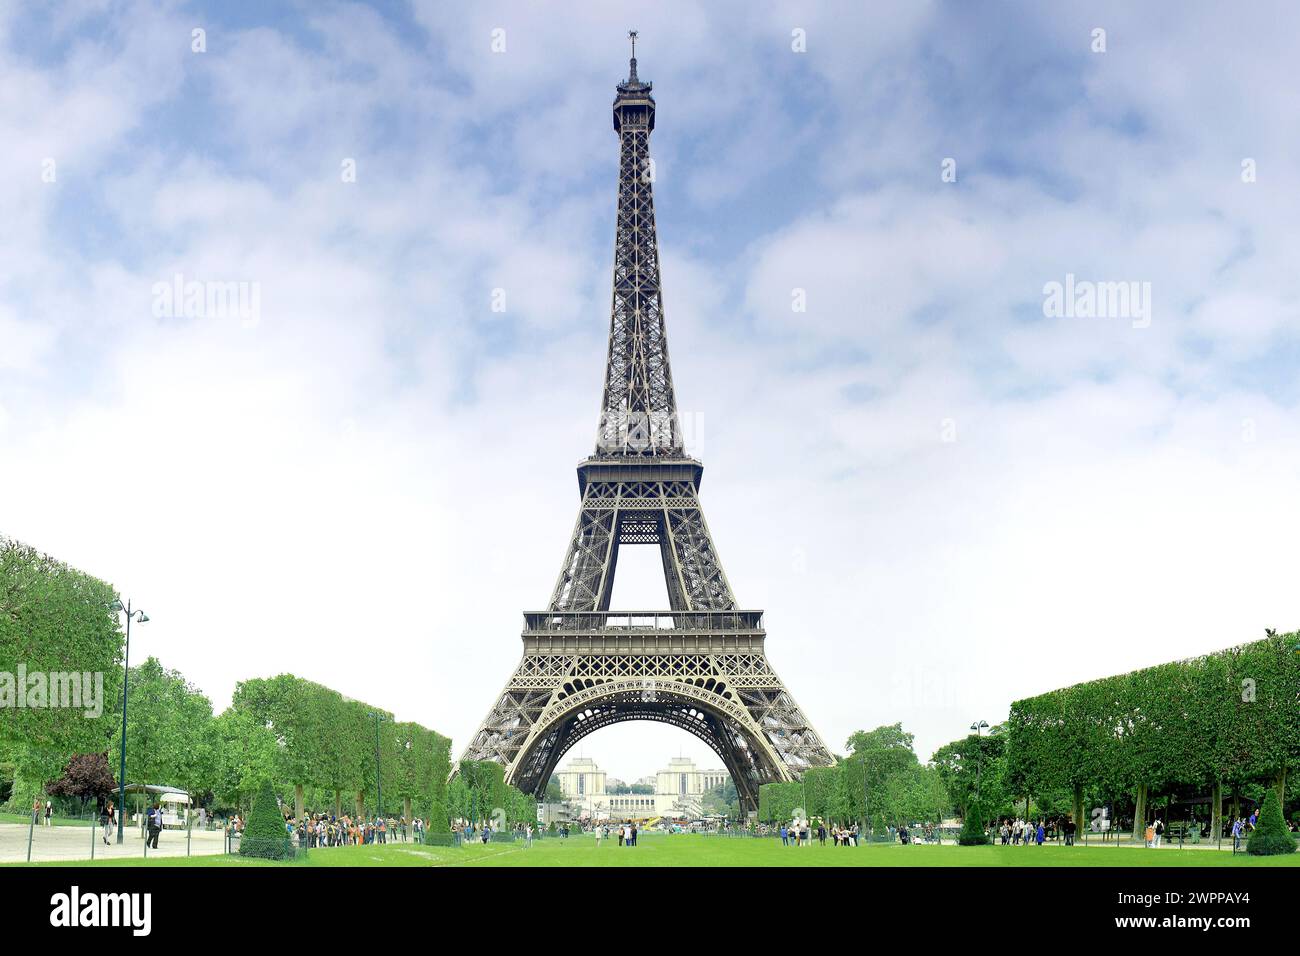 Eiffel tower in Paris with central perspective. Stock Photo